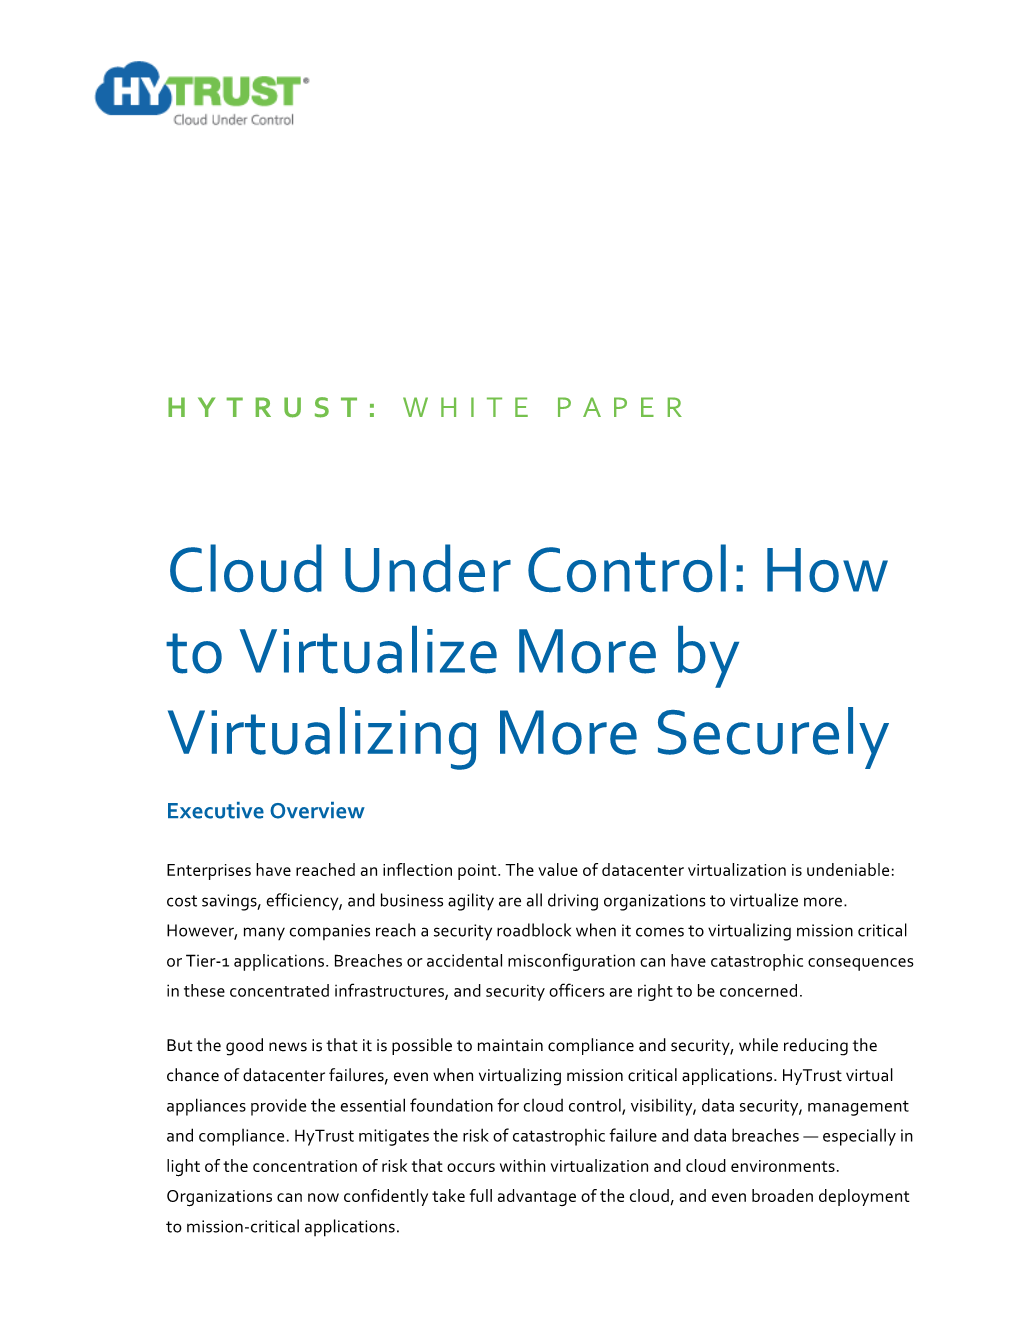 Cloud Under Control: How to Virtualize More by Virtualizing More Securely